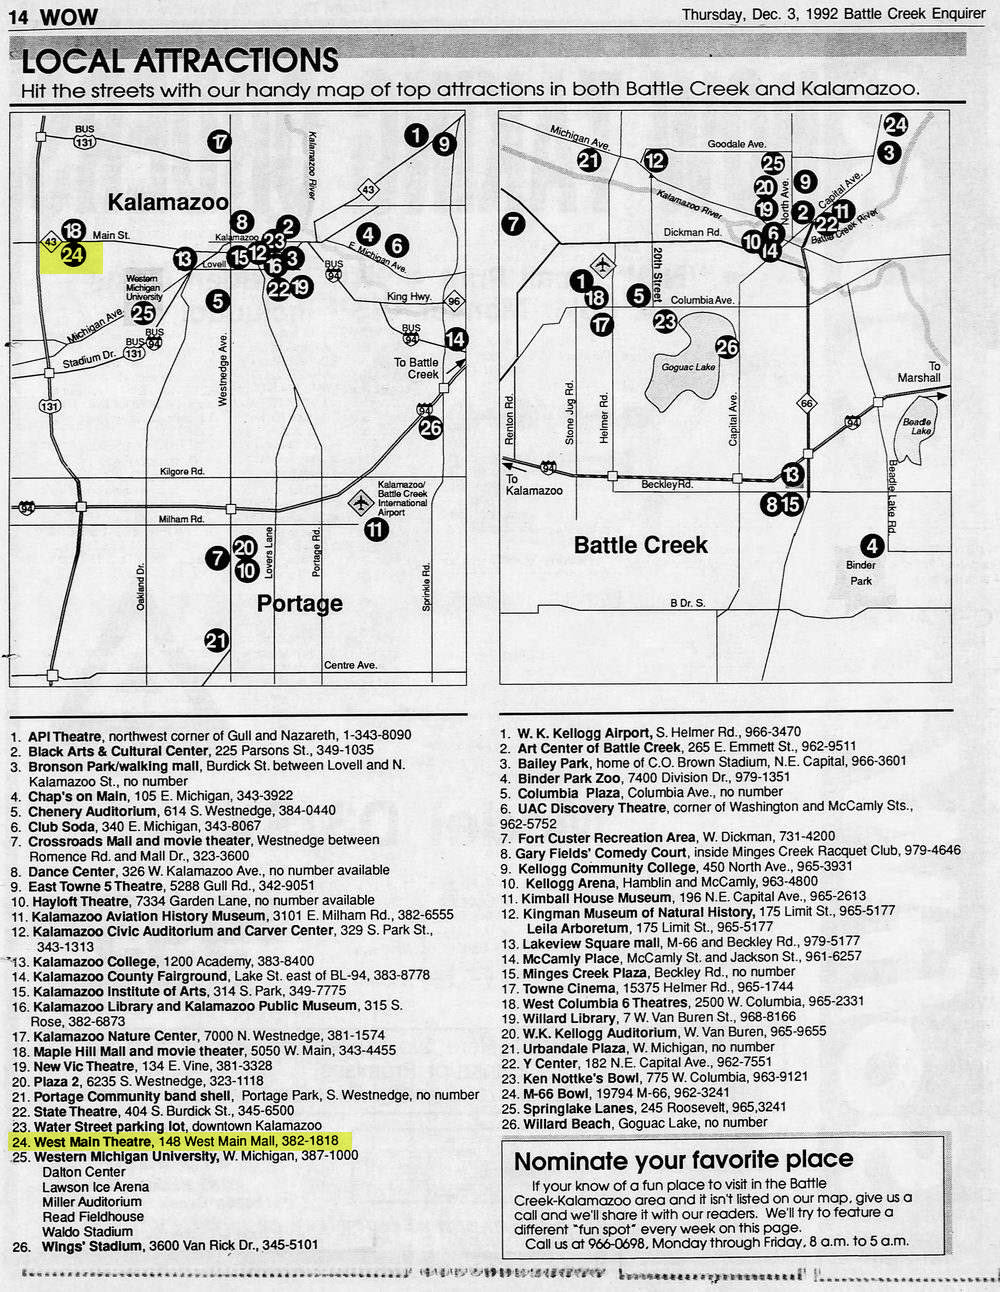 Movies at West Main - 1992 LOCAL ATTRACTION GUIDE